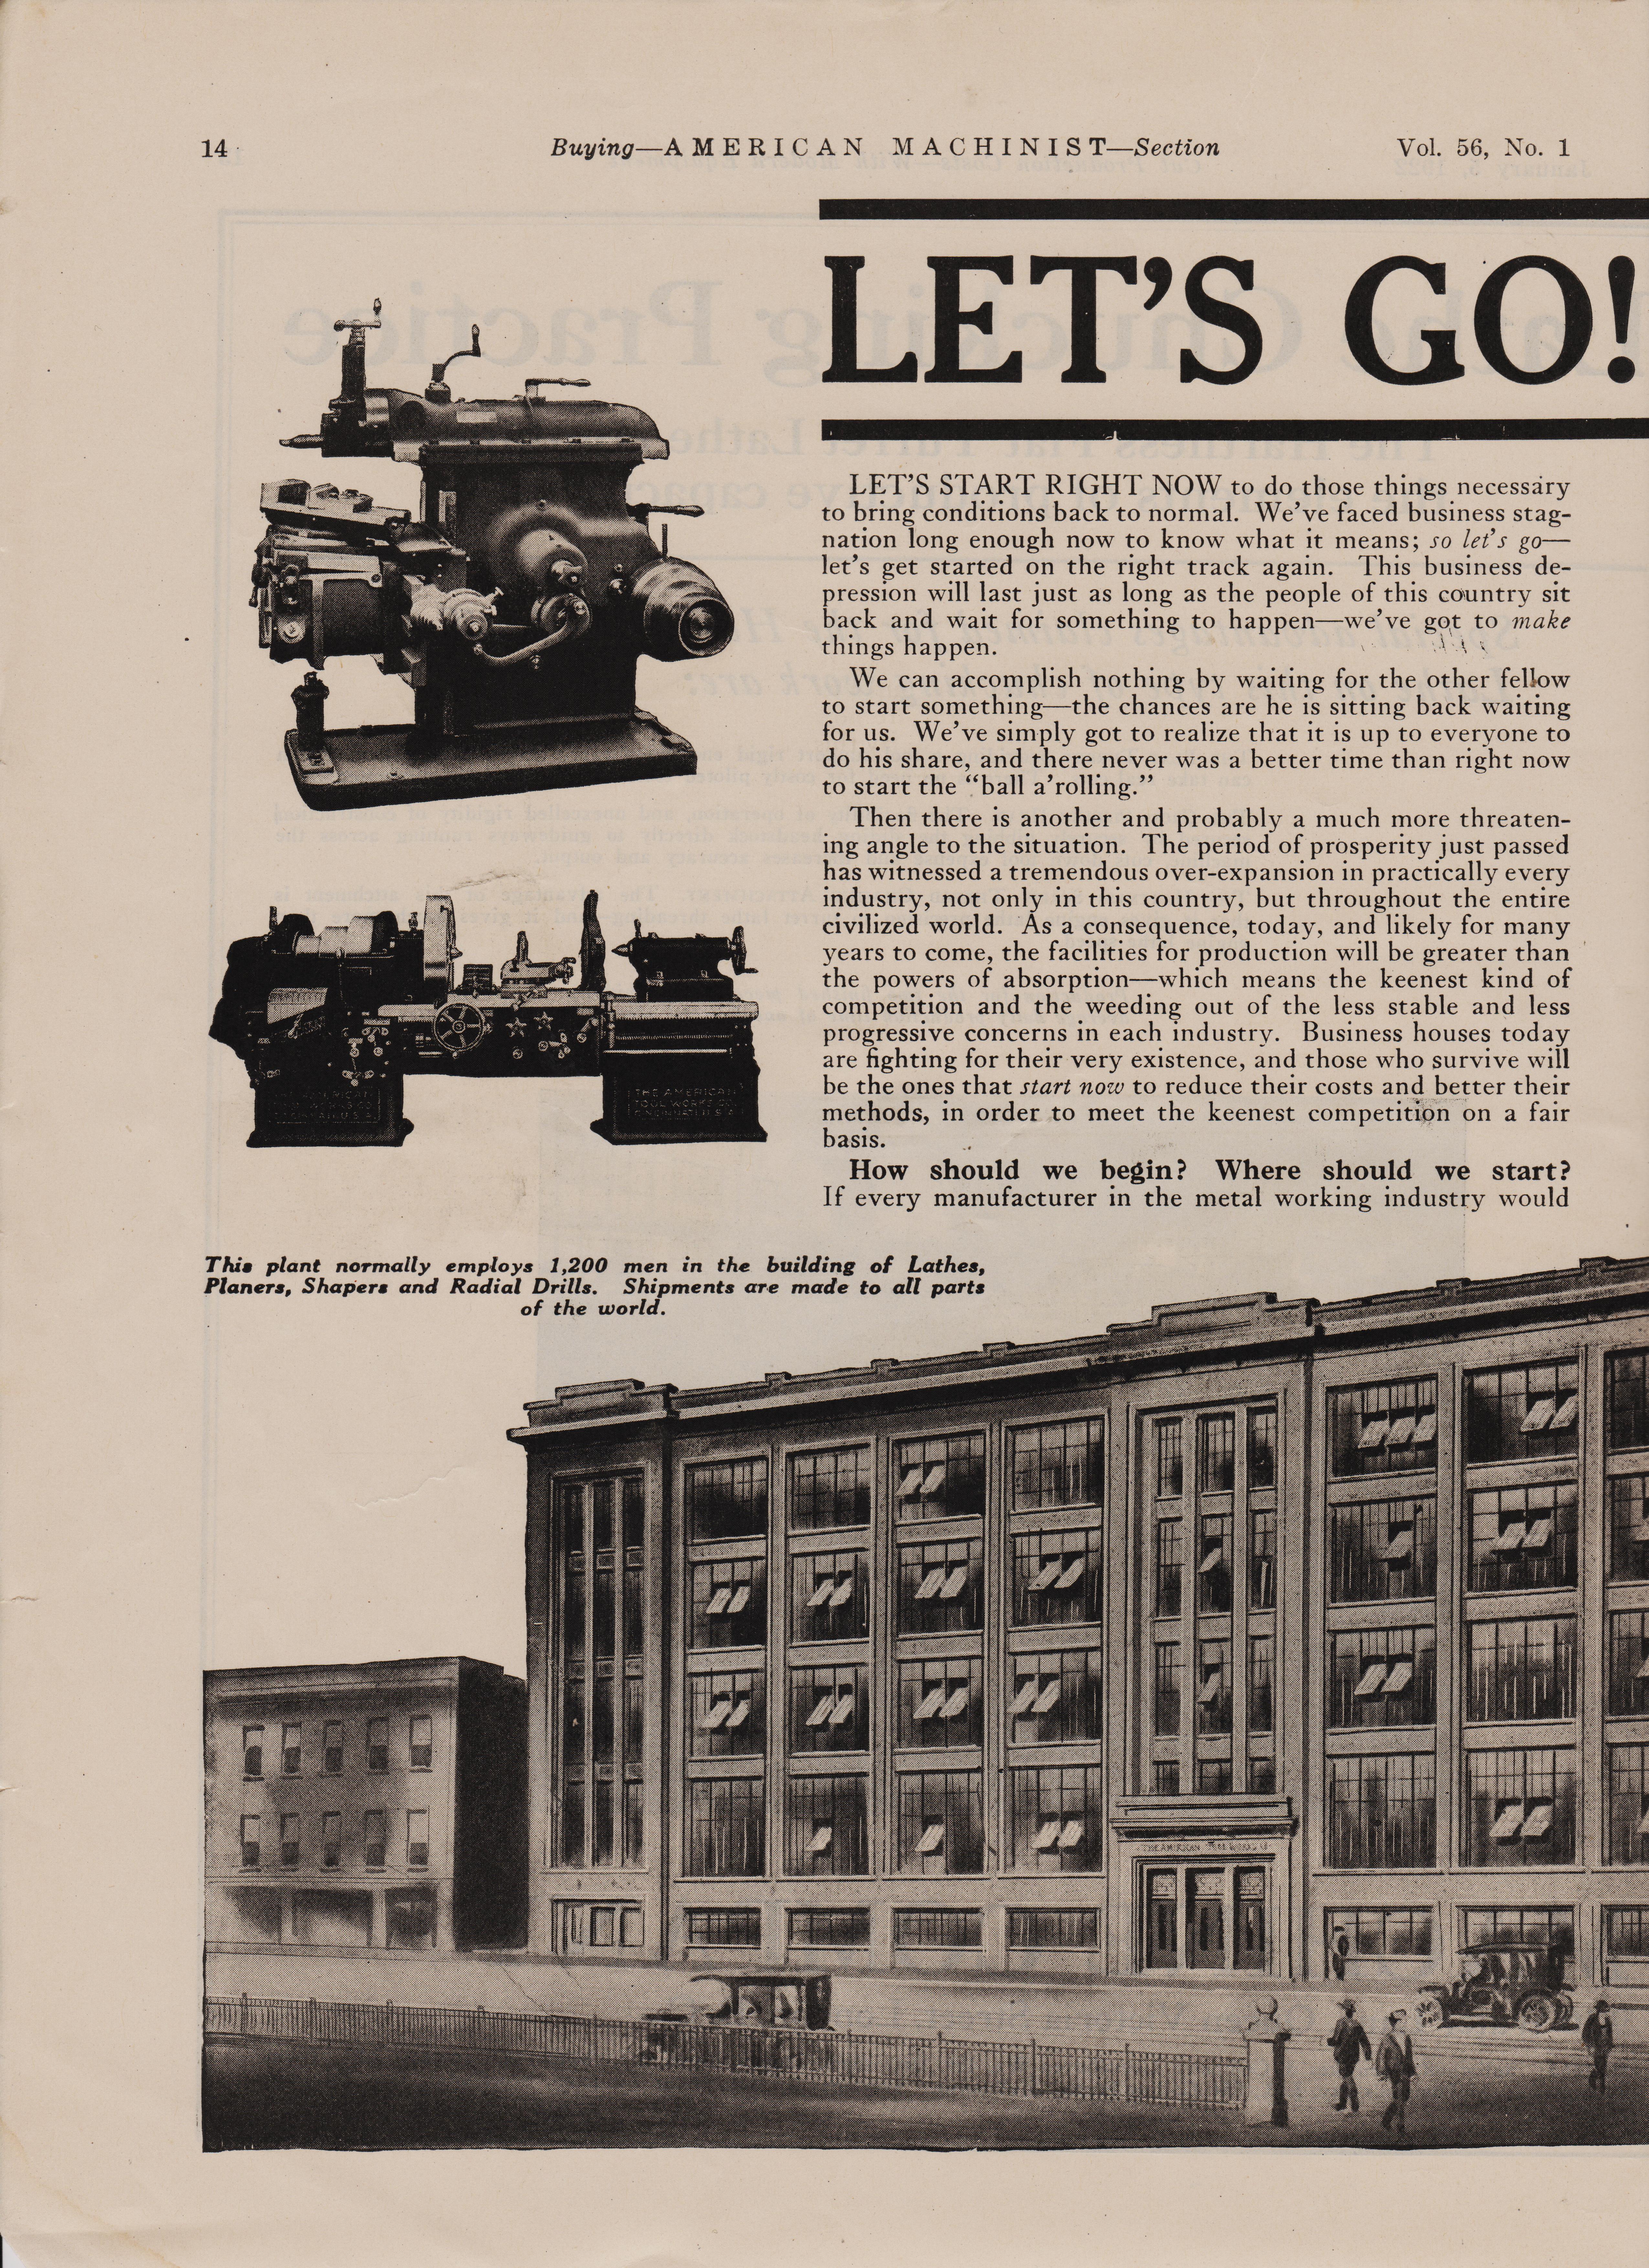 https://antiquemachinery.com/images-2019/American-Machinist-January-5-1922-pg-14-American-Tool_Works-Co-Shaper-Planer-Radial-Lathe-left-page.jpeg